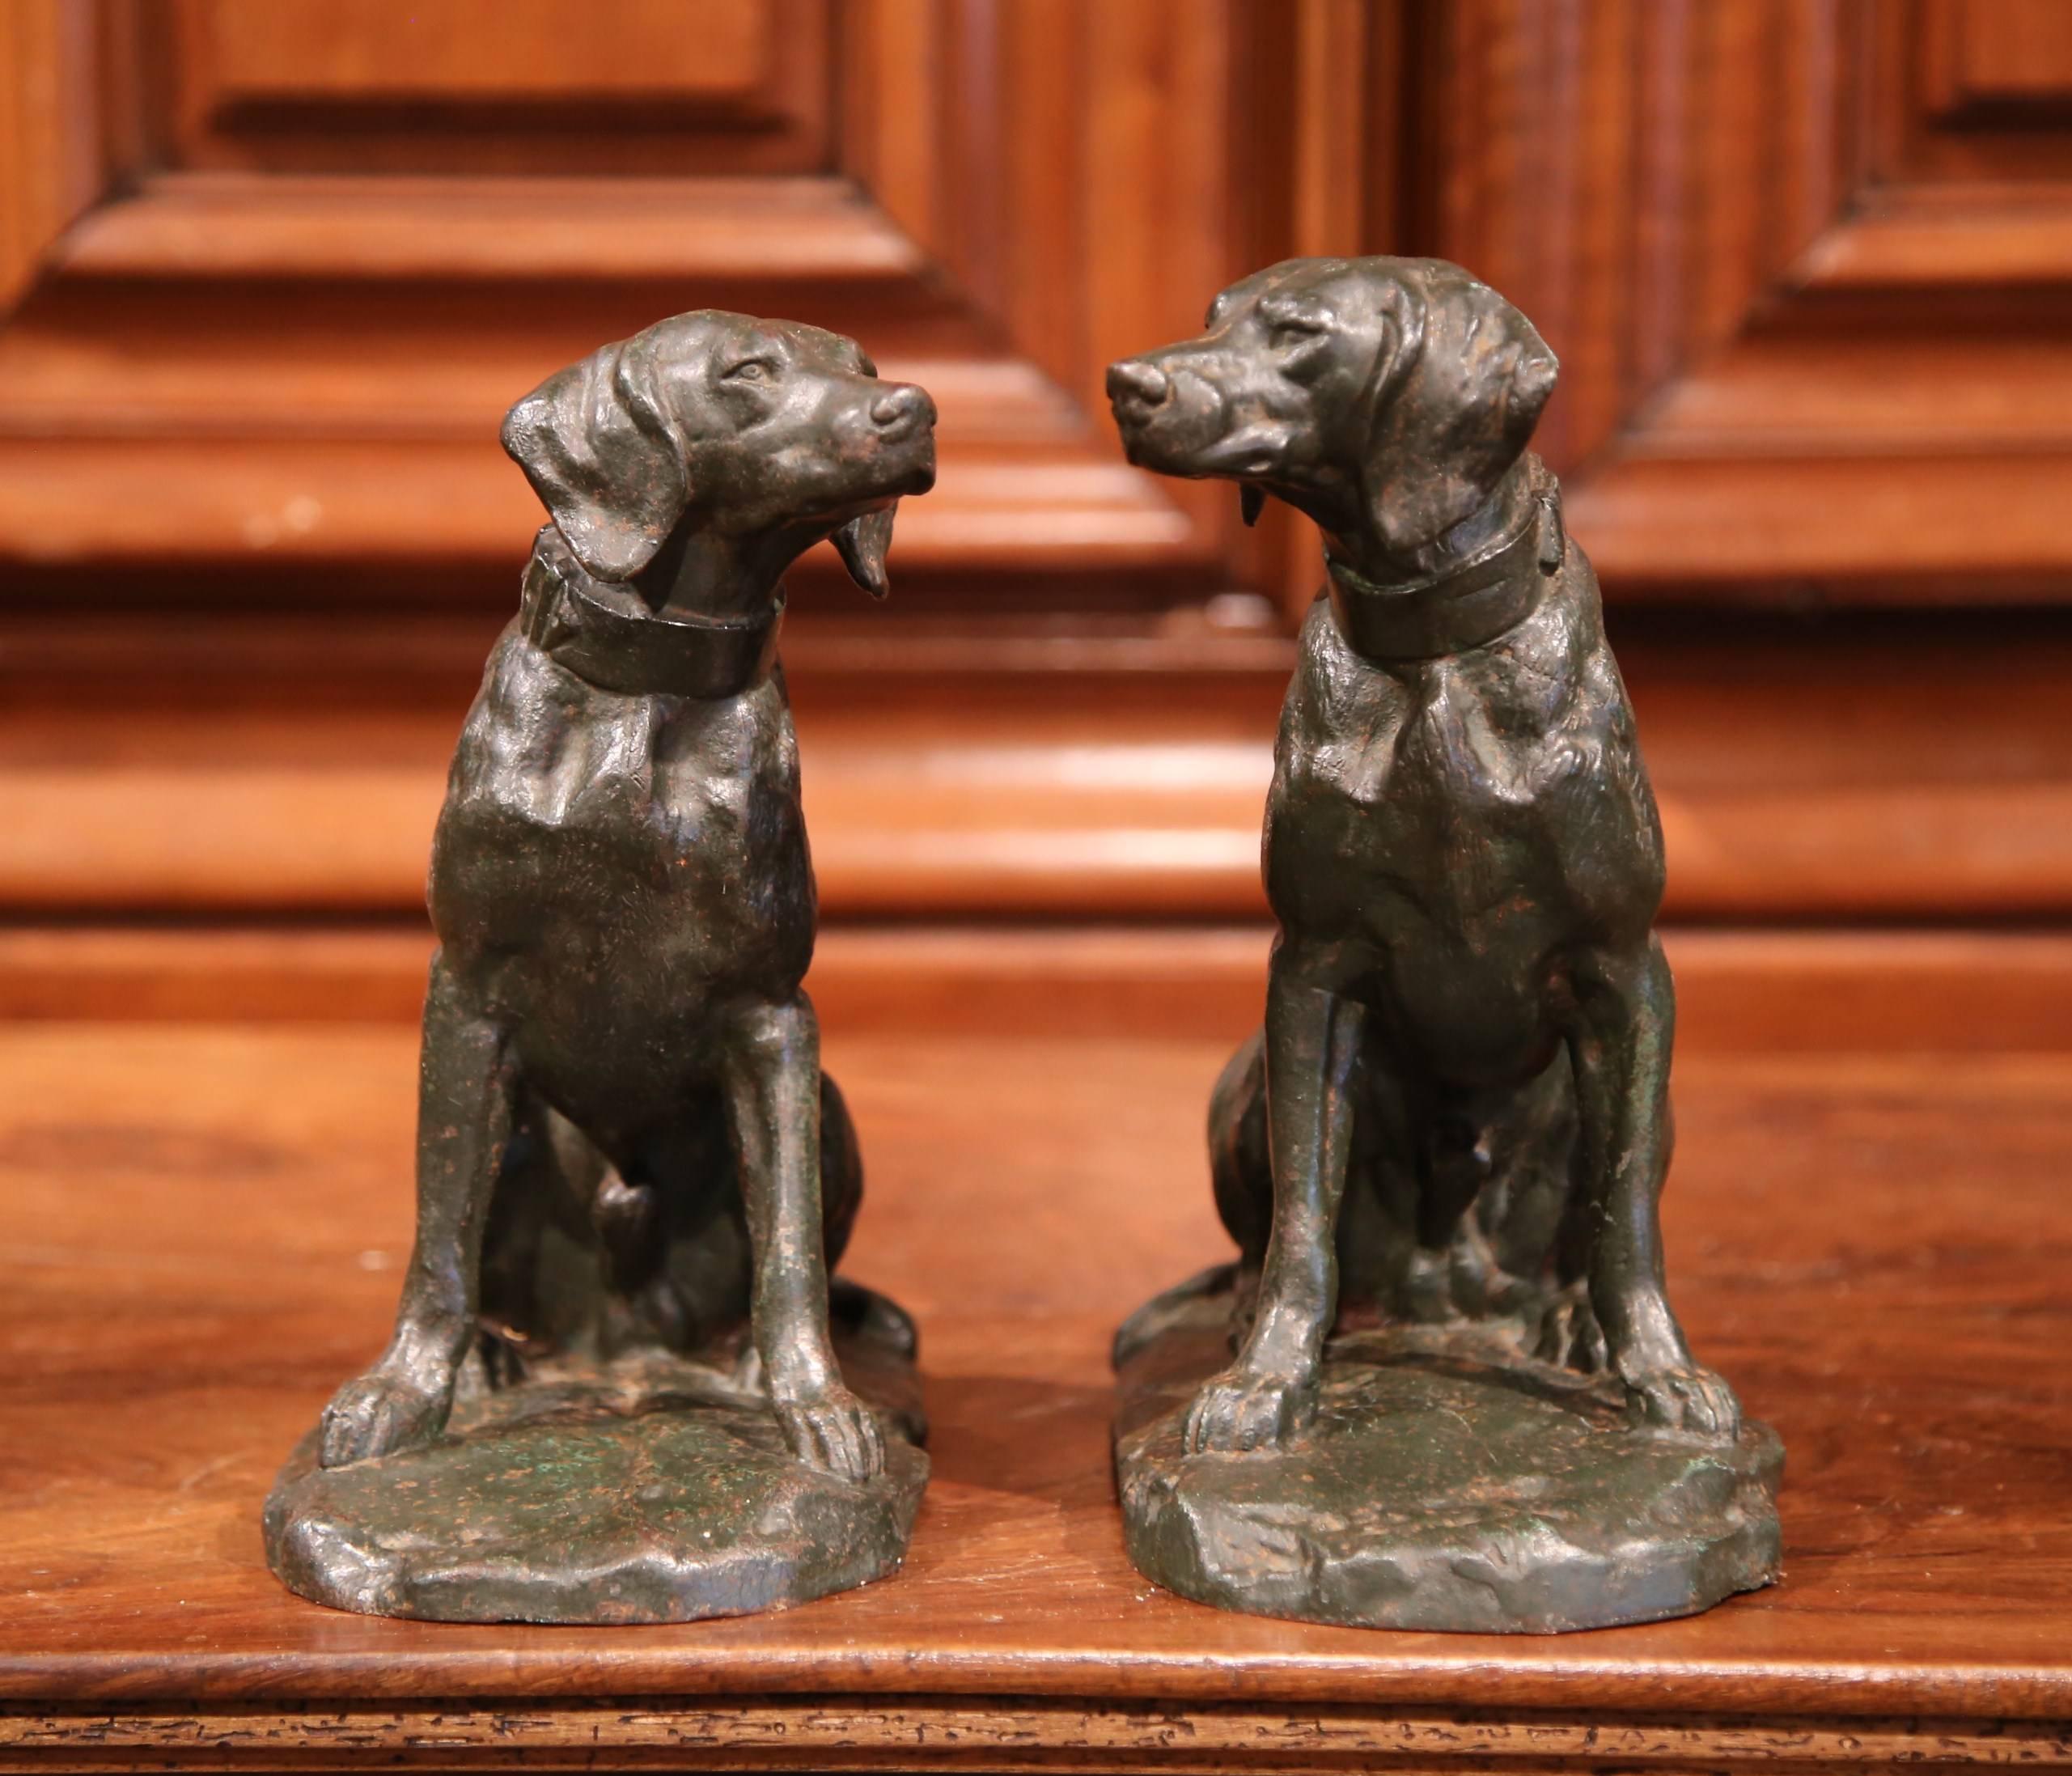 This Fine pair of antique bronze hunting dogs were crafted in France, circa 1860. The Classic dog sculptures feature two Labrador Retrievers with collars sitting on their back feet. These unsigned pieces are in very good condition and have a worn,